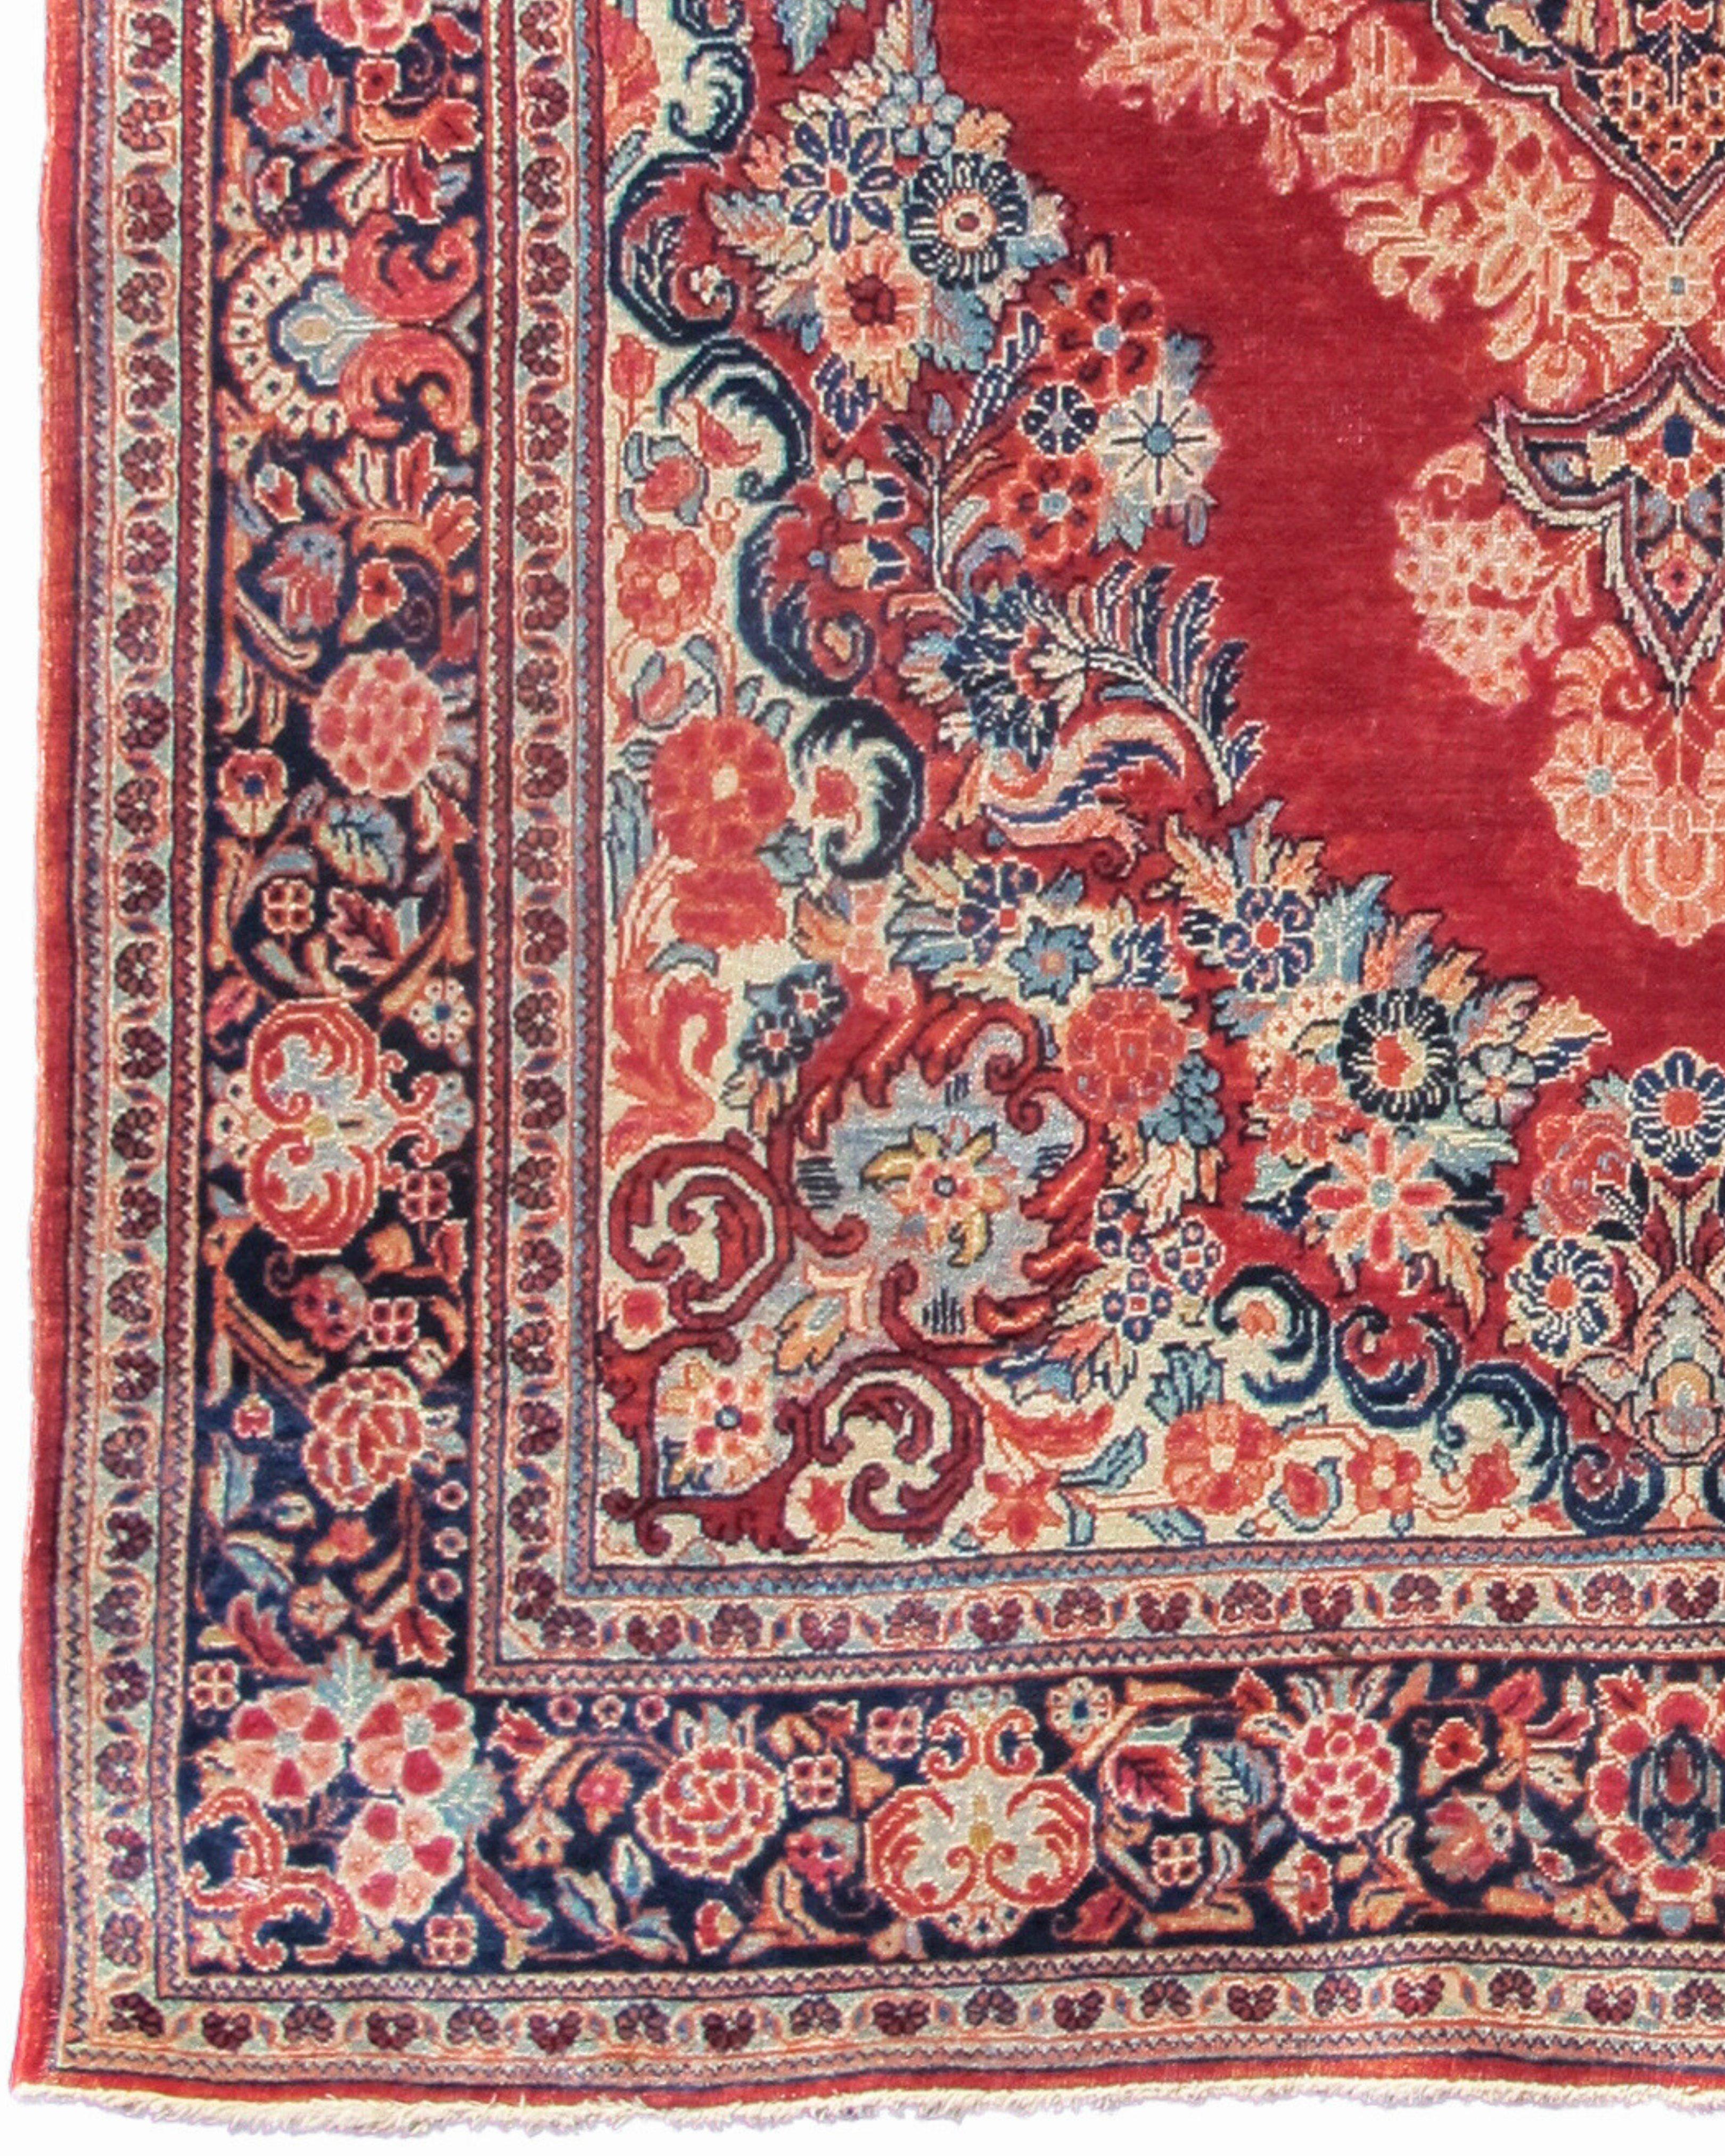 Antique Persian Sarouk Rug, Early 20th Century In Excellent Condition For Sale In San Francisco, CA